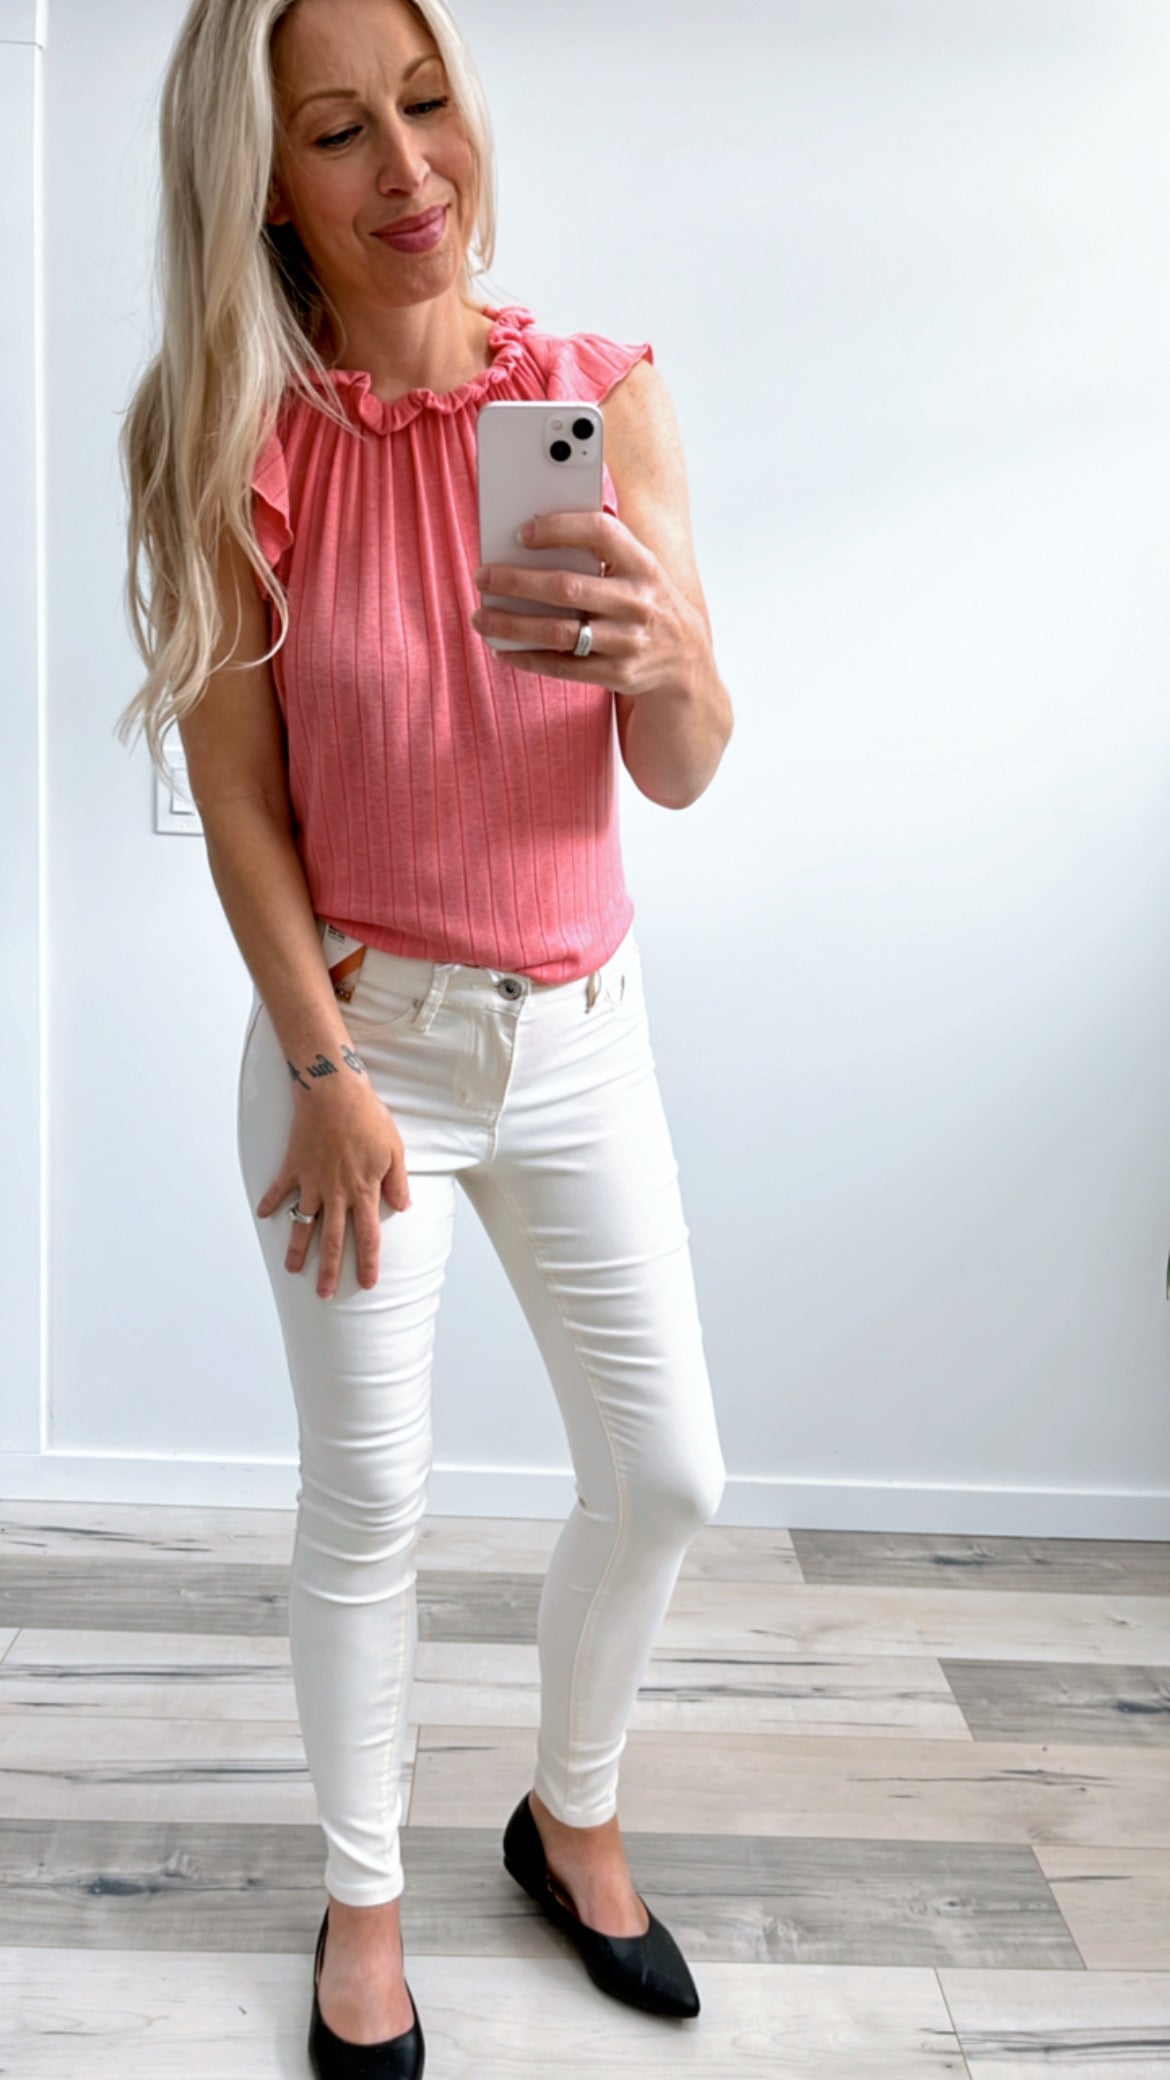 Hyperstretch Mid-Rise Skinny Jean - Ivory